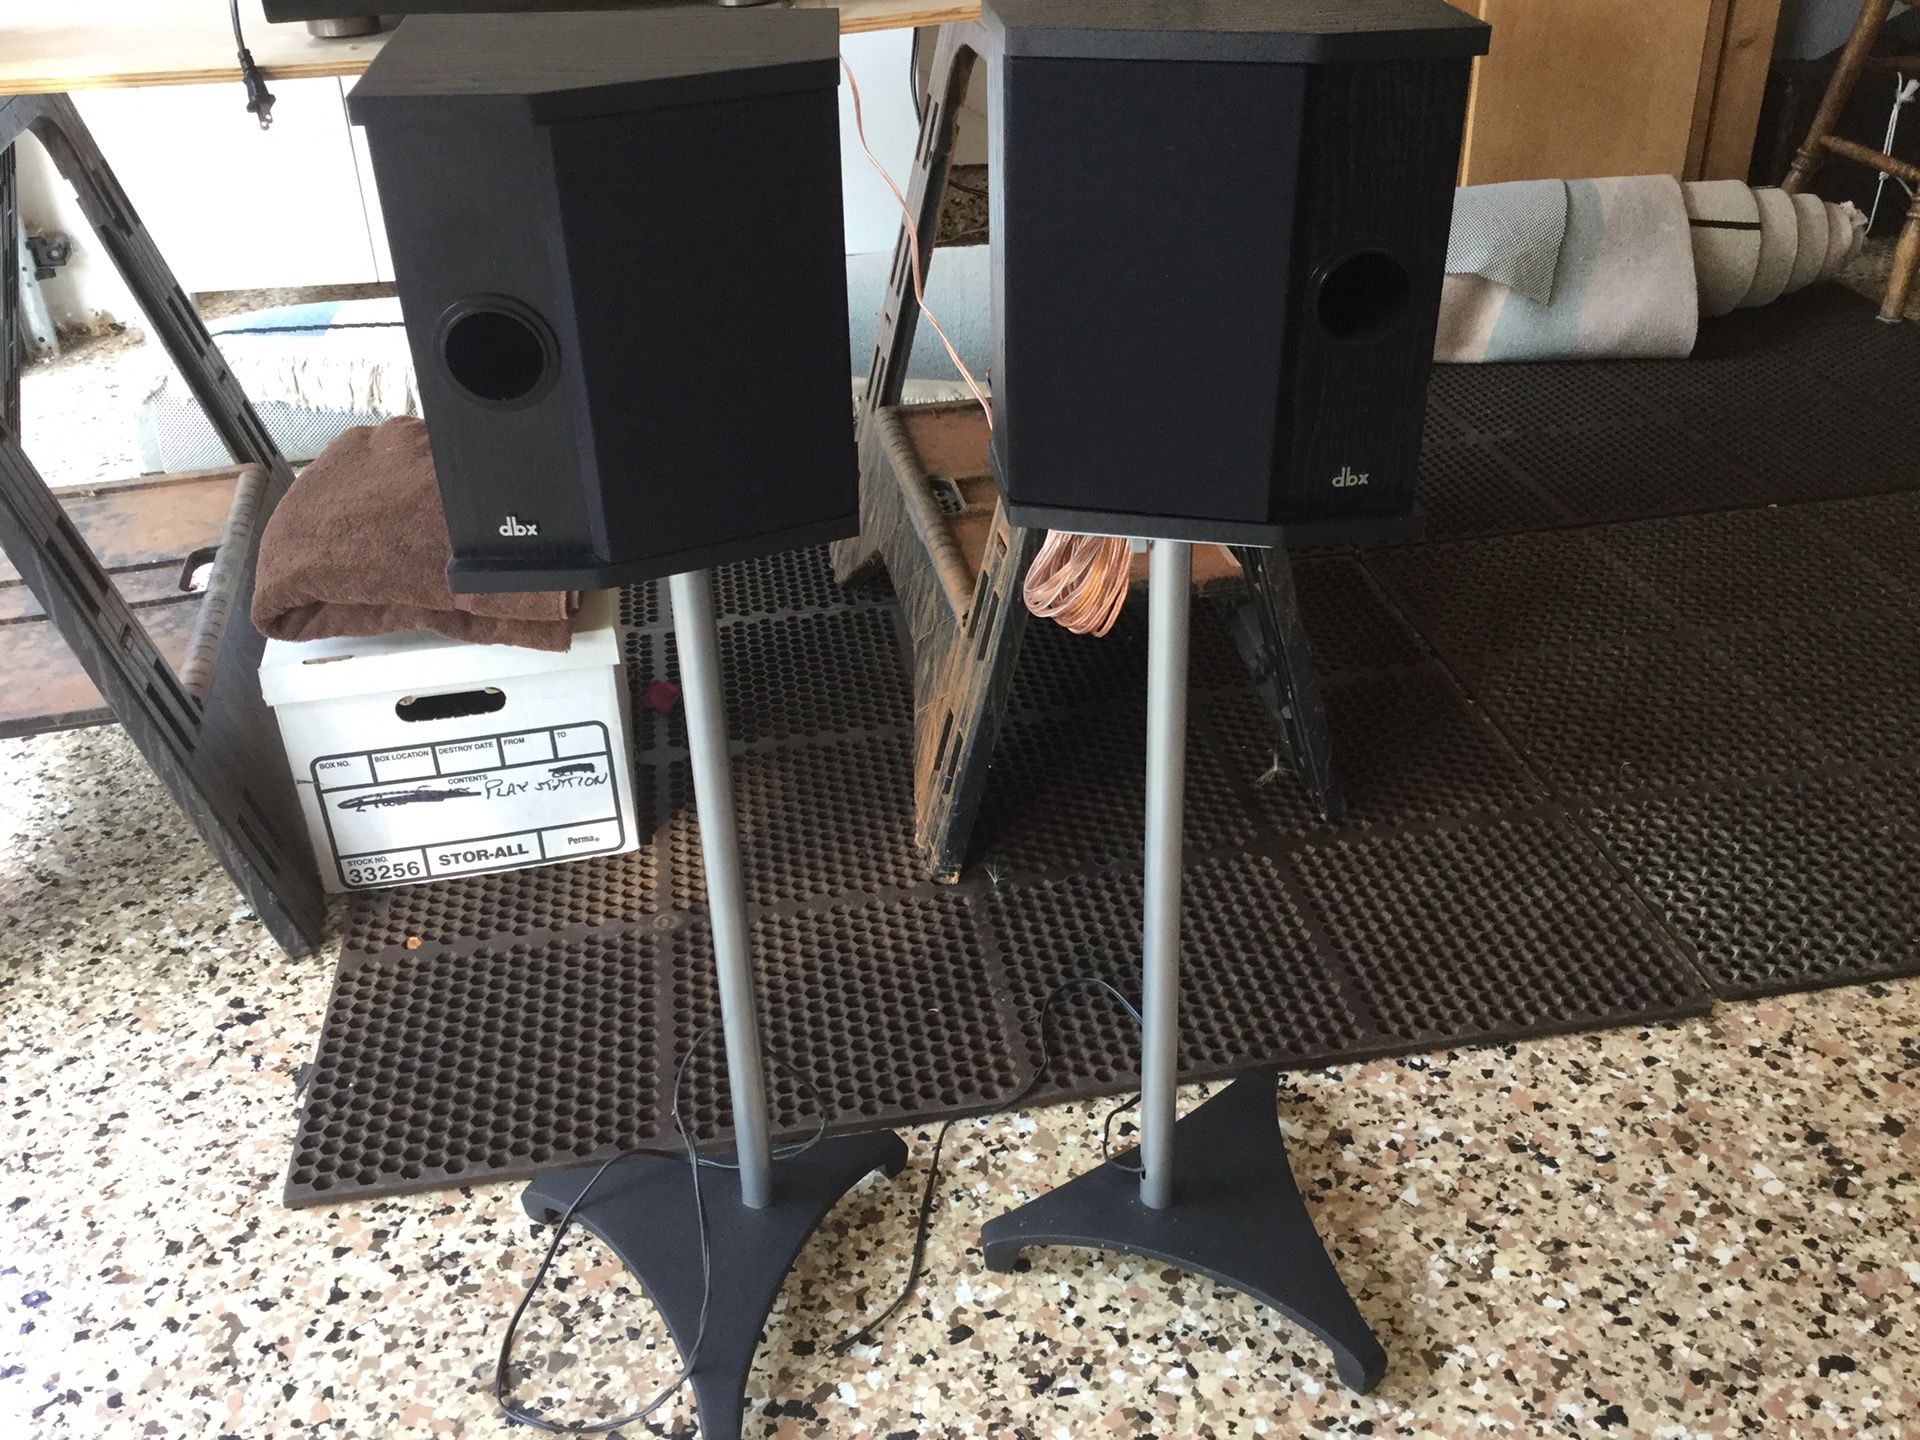 DBX Speakers on Stands. Set of 2.